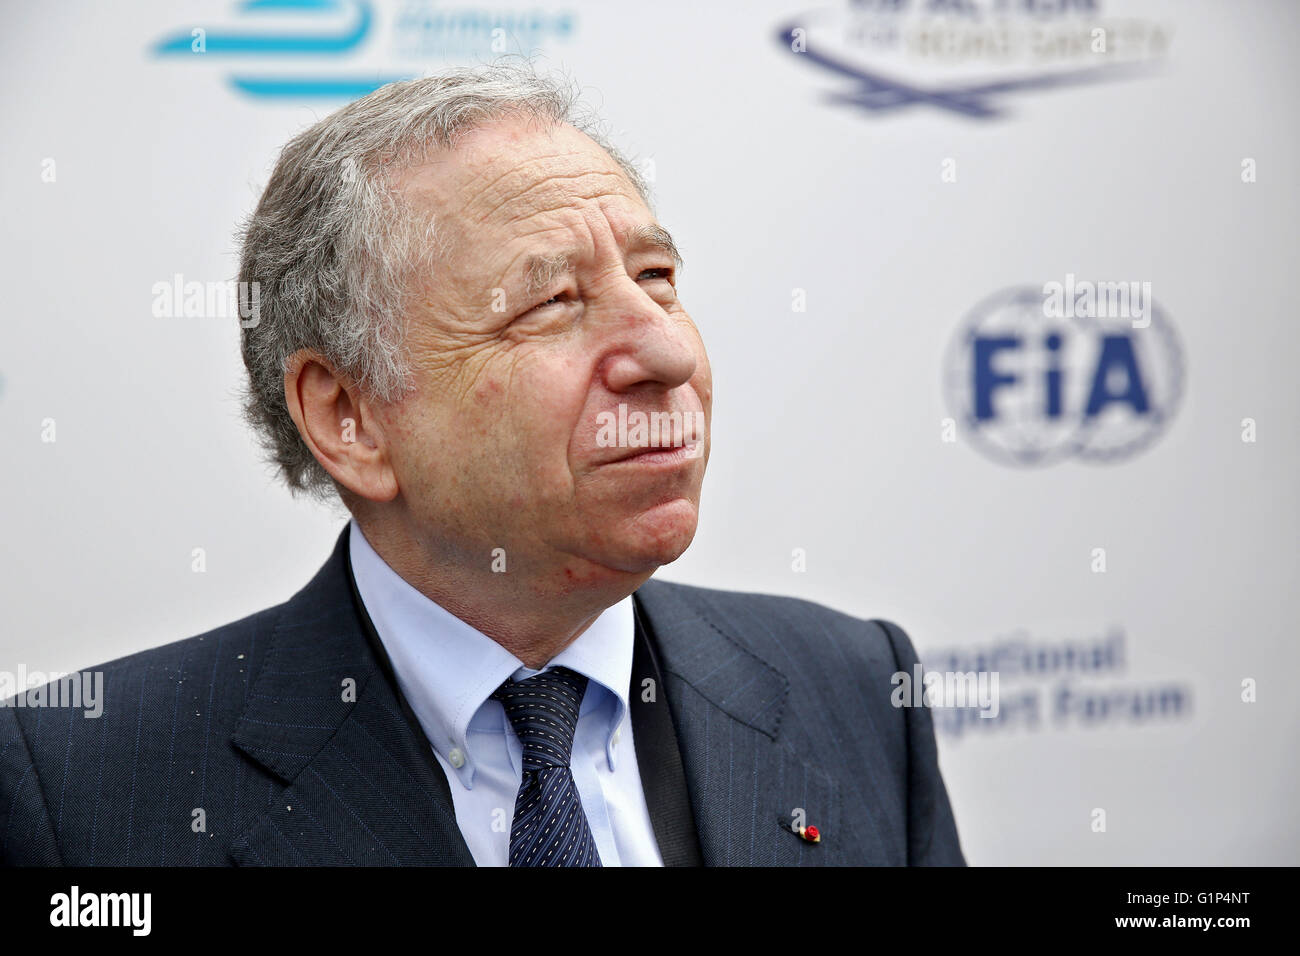 Leipzig, Germany. 18th May, 2016. Jean Todt, president of the International Automobile Federation (FIA), seen at the world summit of transport ministers in Leipzig, Germany, 18 May 2016. Some 1,000 participants from 60 countries are expected to attend the three-day summit held by the International Transport Forum of the Organisation for Economic Co-operation and Development (OECD). Photo: JAN WOITAS/dpa/Alamy Live News Stock Photo